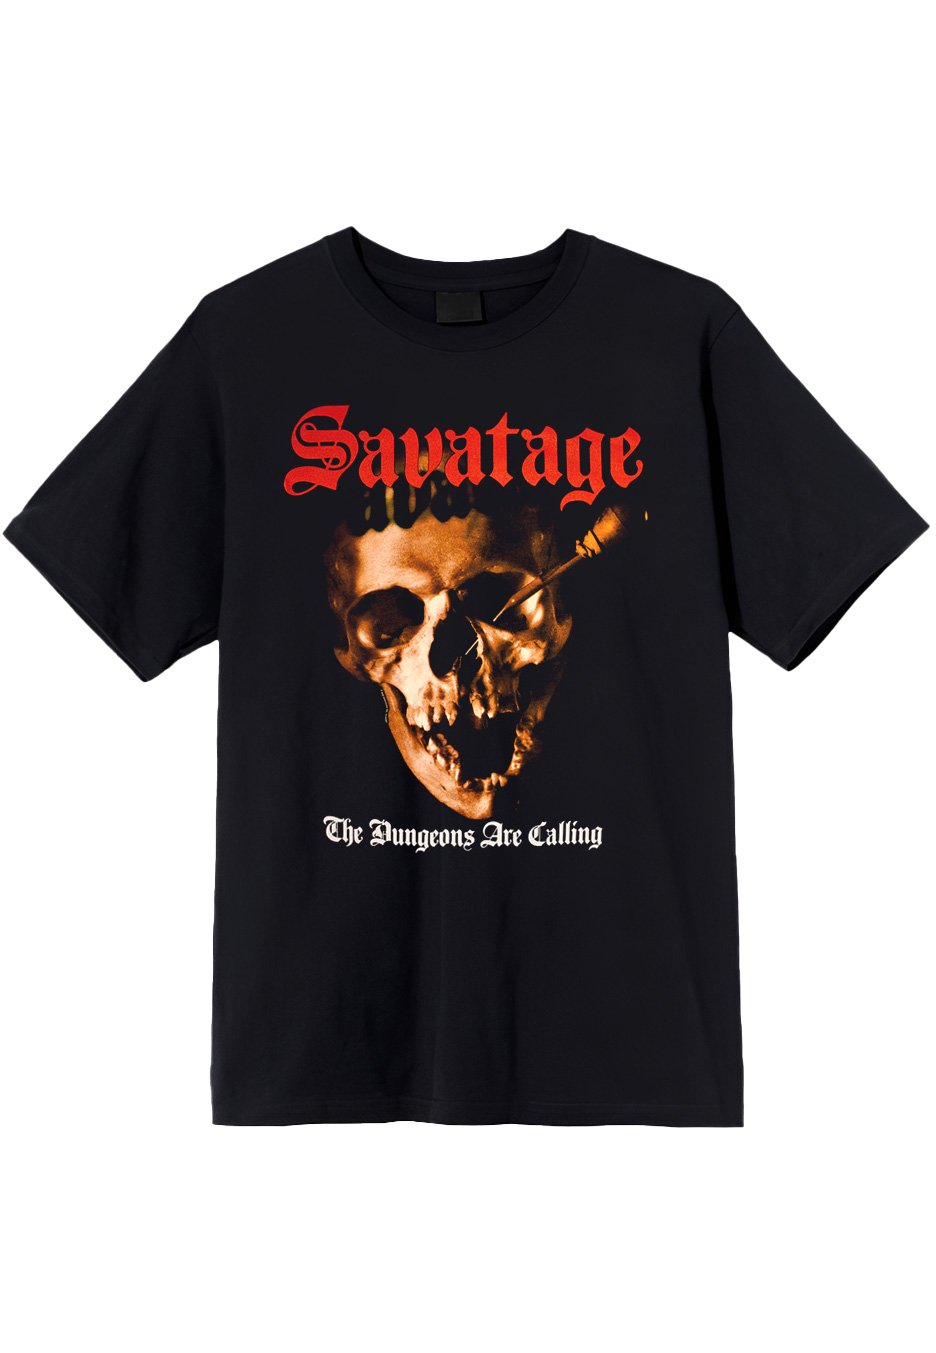 Savatage - The Dungeons Are Calling - T-Shirt